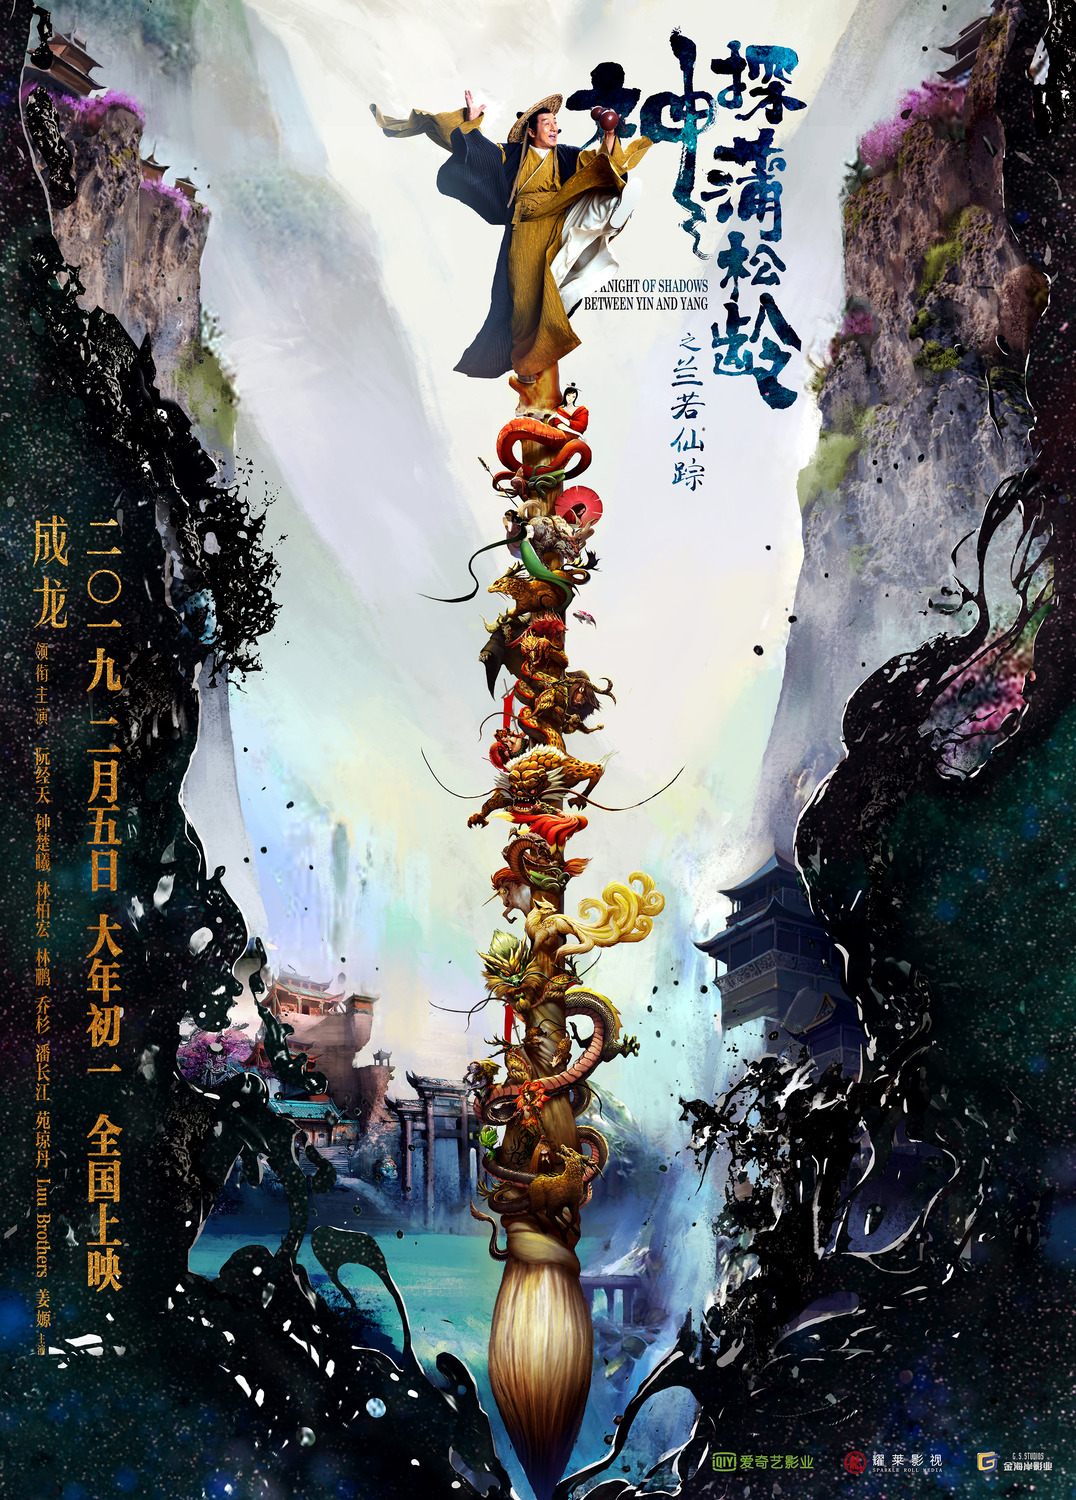 Extra Large Movie Poster Image for Shen tan Pu Song Ling 